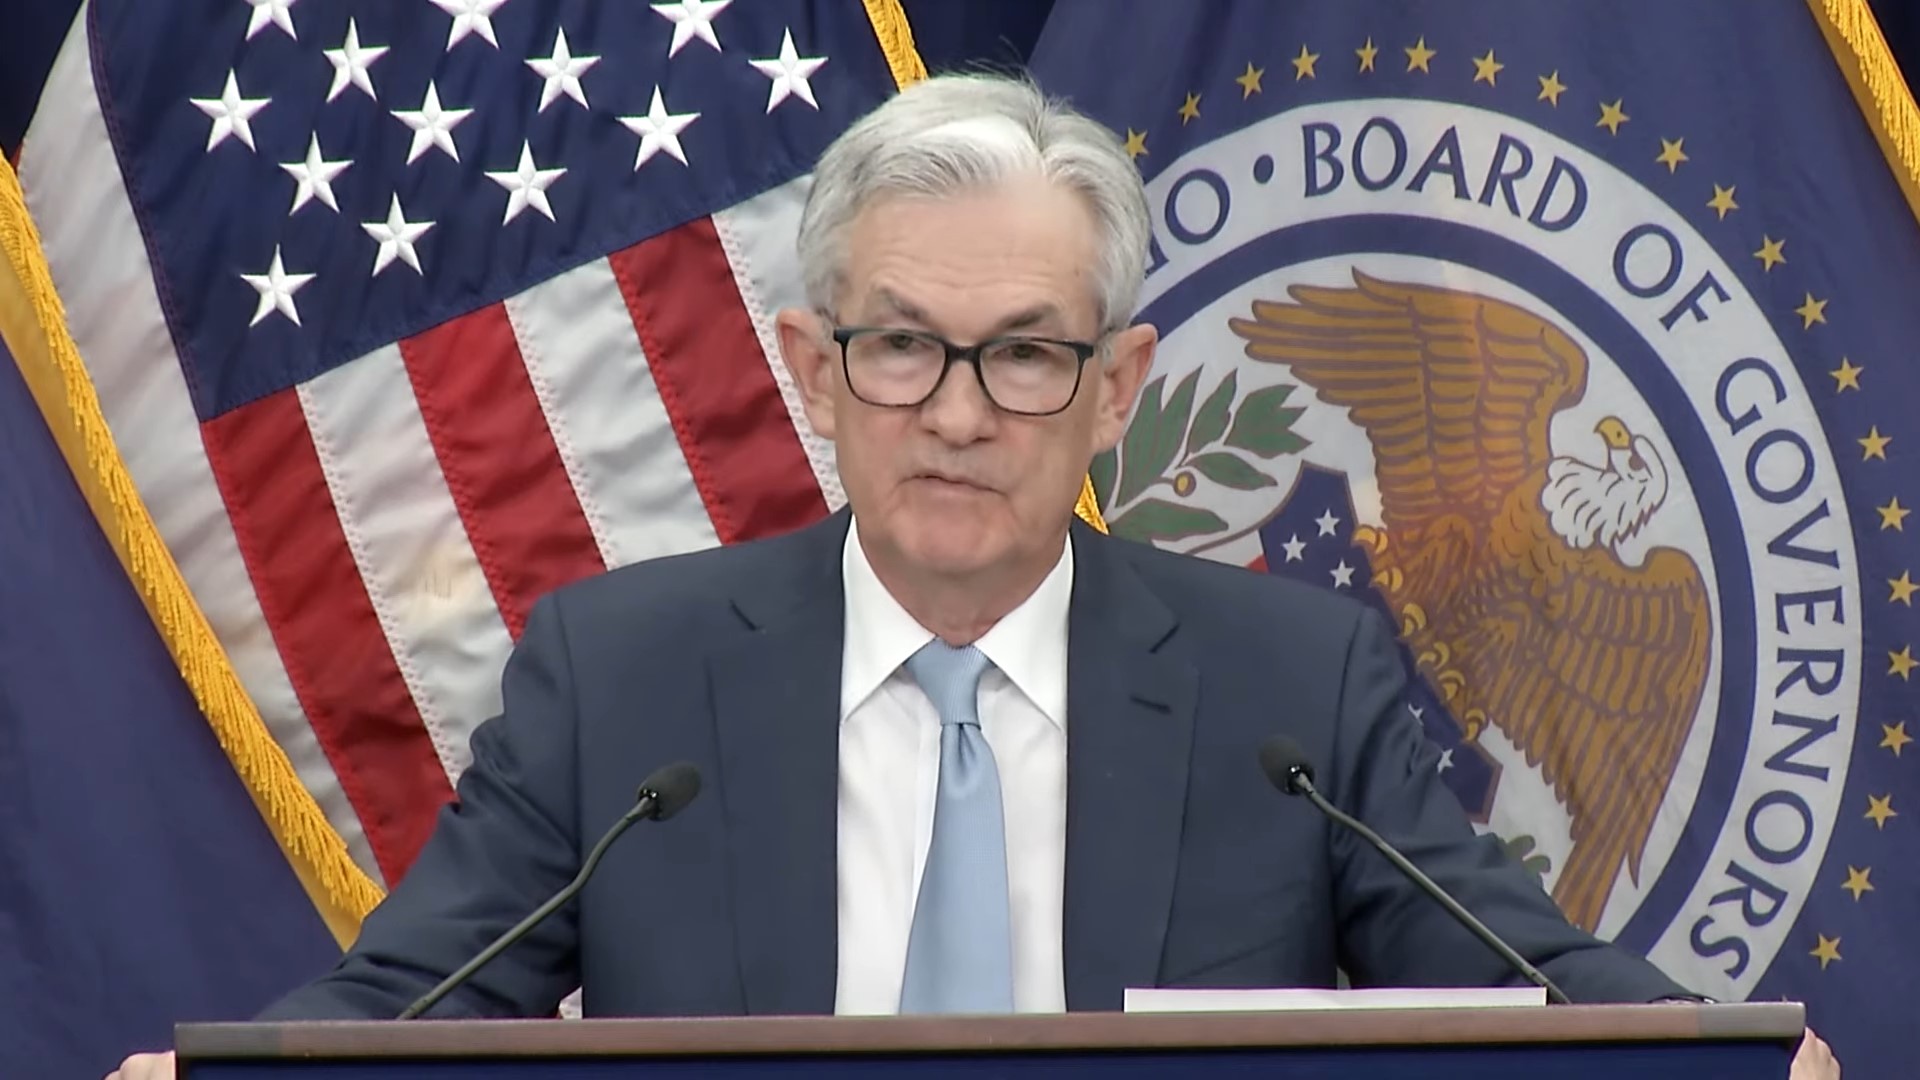 Jerome Powell speaking during the FOMC press conference on Dec 14